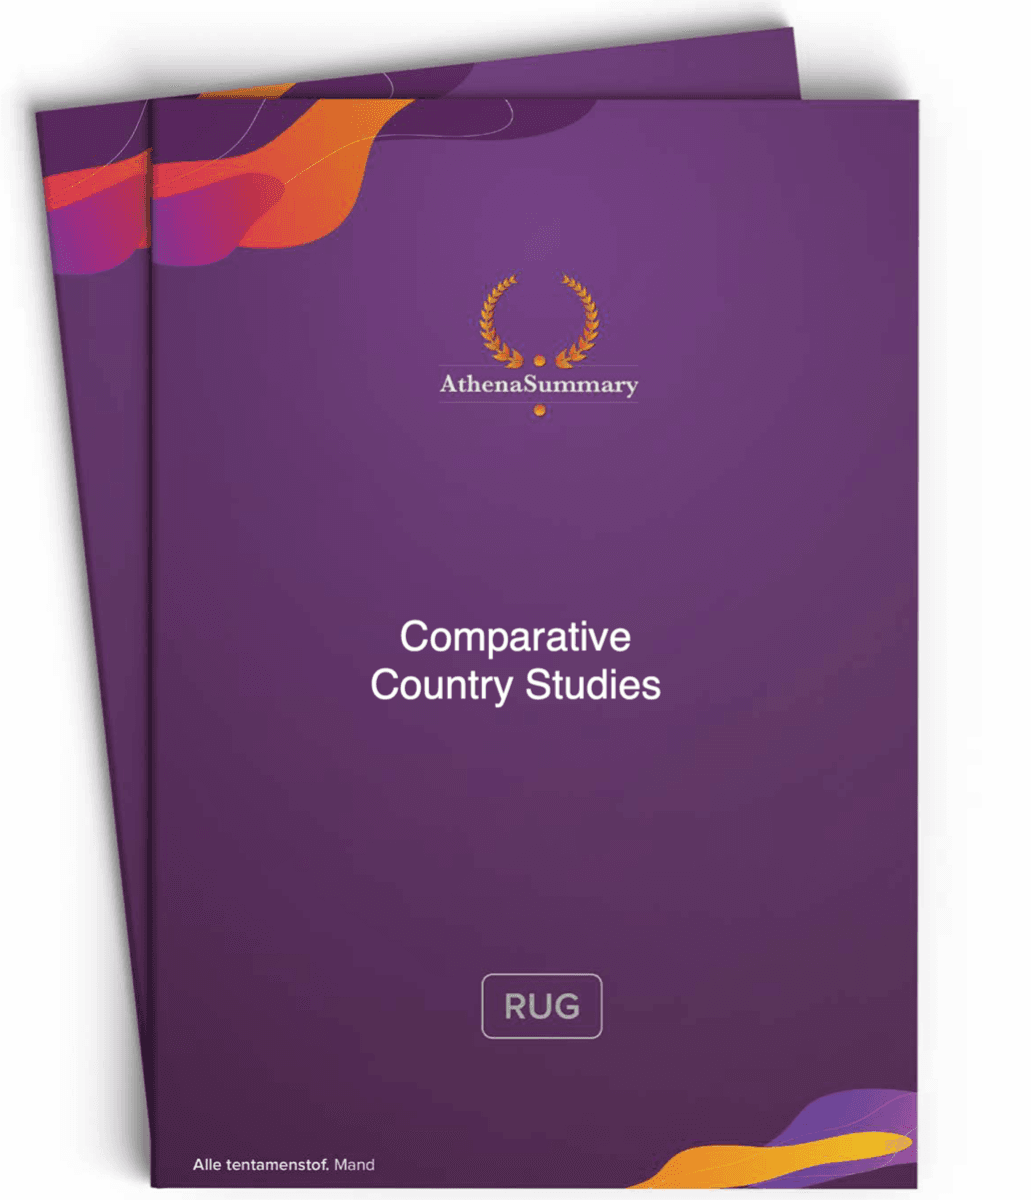 Literature Summary - Comparative Country Studies